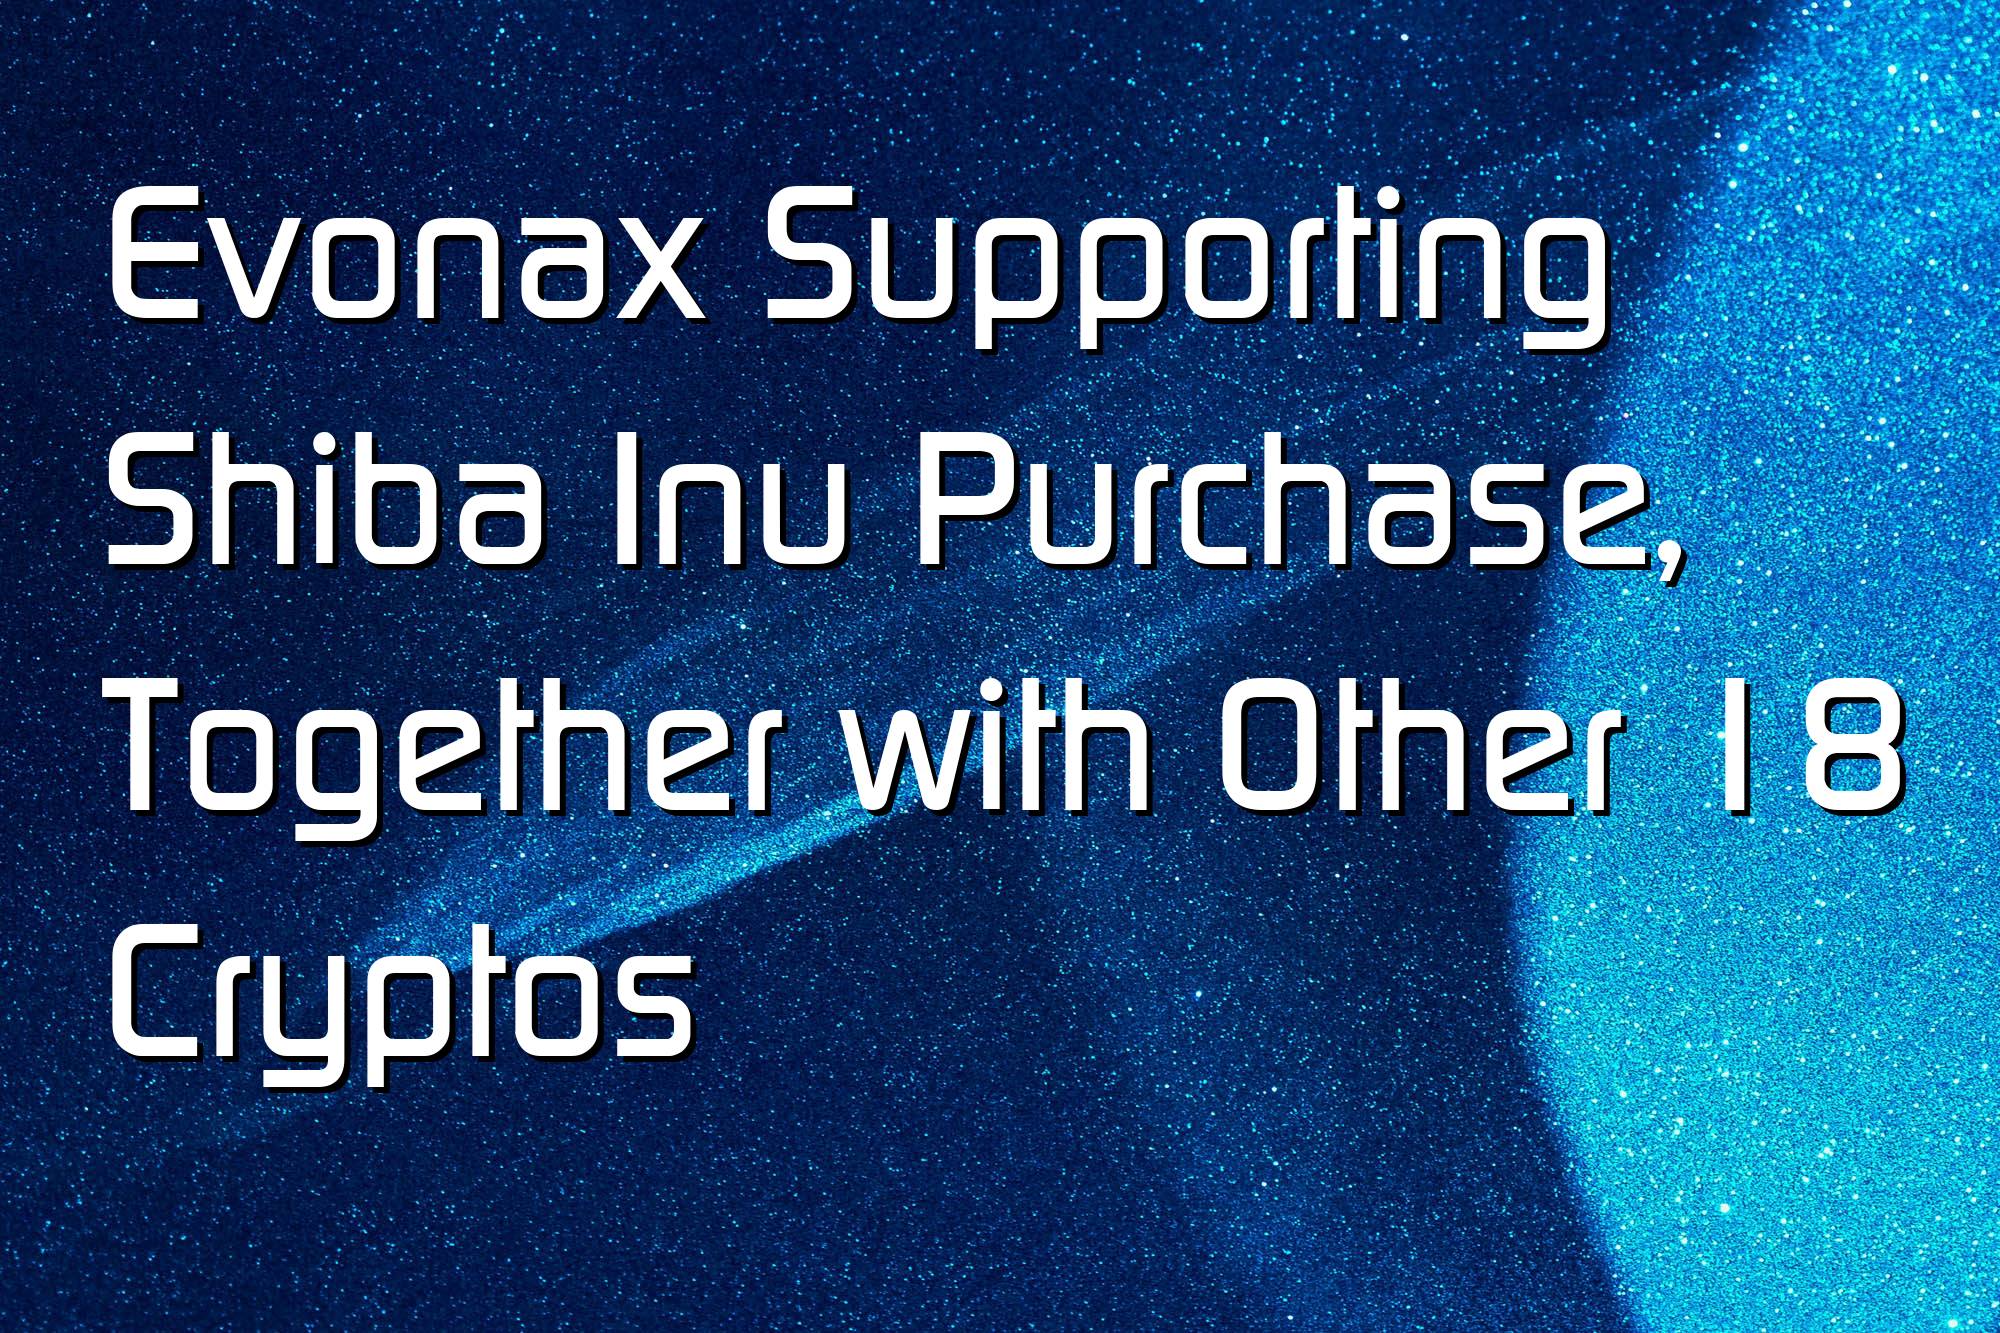 @$61507: Evonax Supporting Shiba Inu Purchase, Together with Other 18 Cryptos